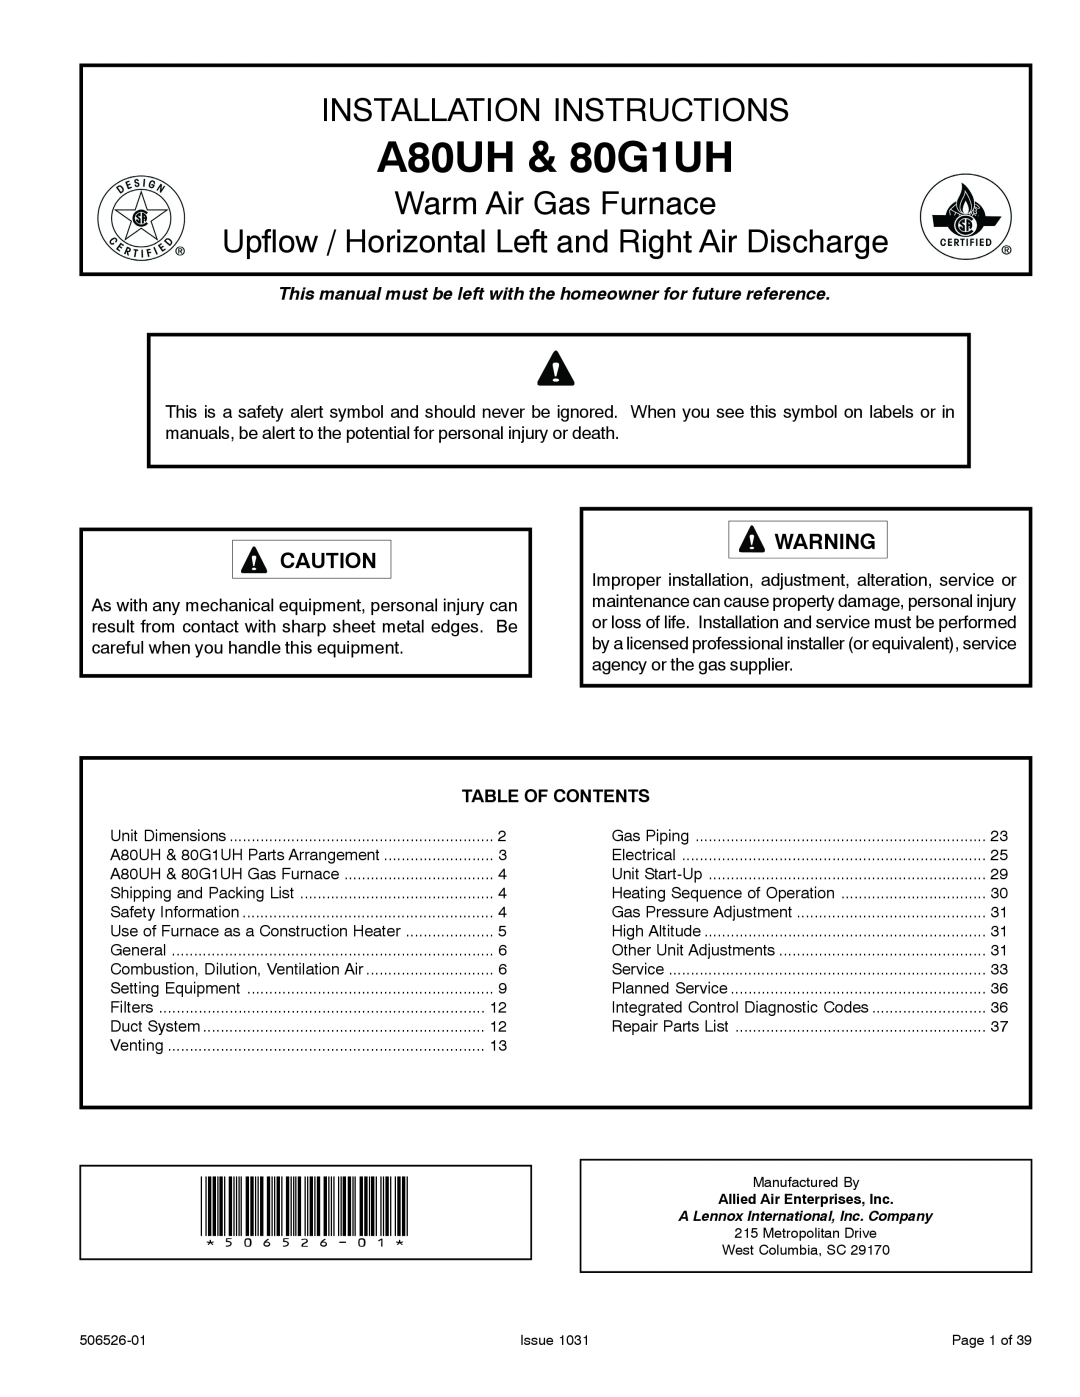 Allied Air Enterprises installation instructions Table Of Contents, A80UH & 80G1UH, Installation Instructions 